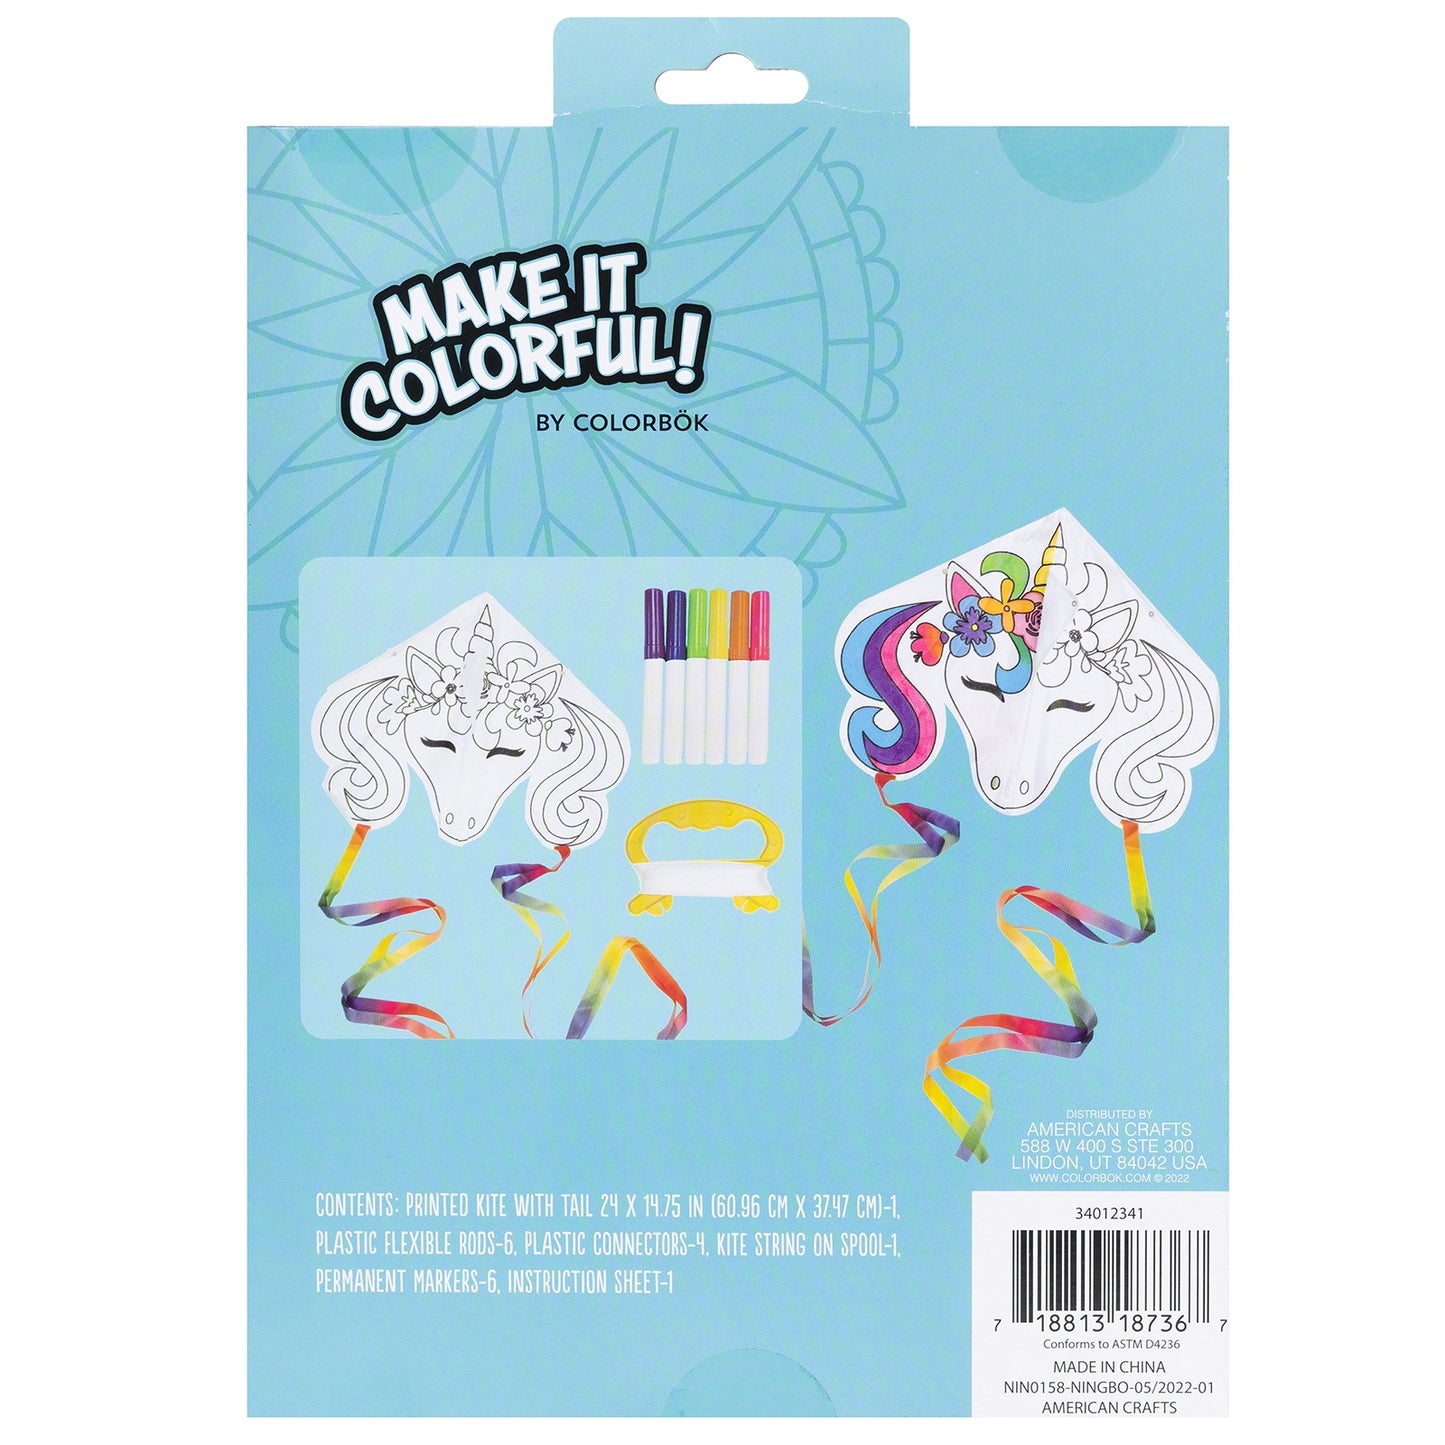 Colorbok Make It Colorful! Color Your Own Kite-Unicorn